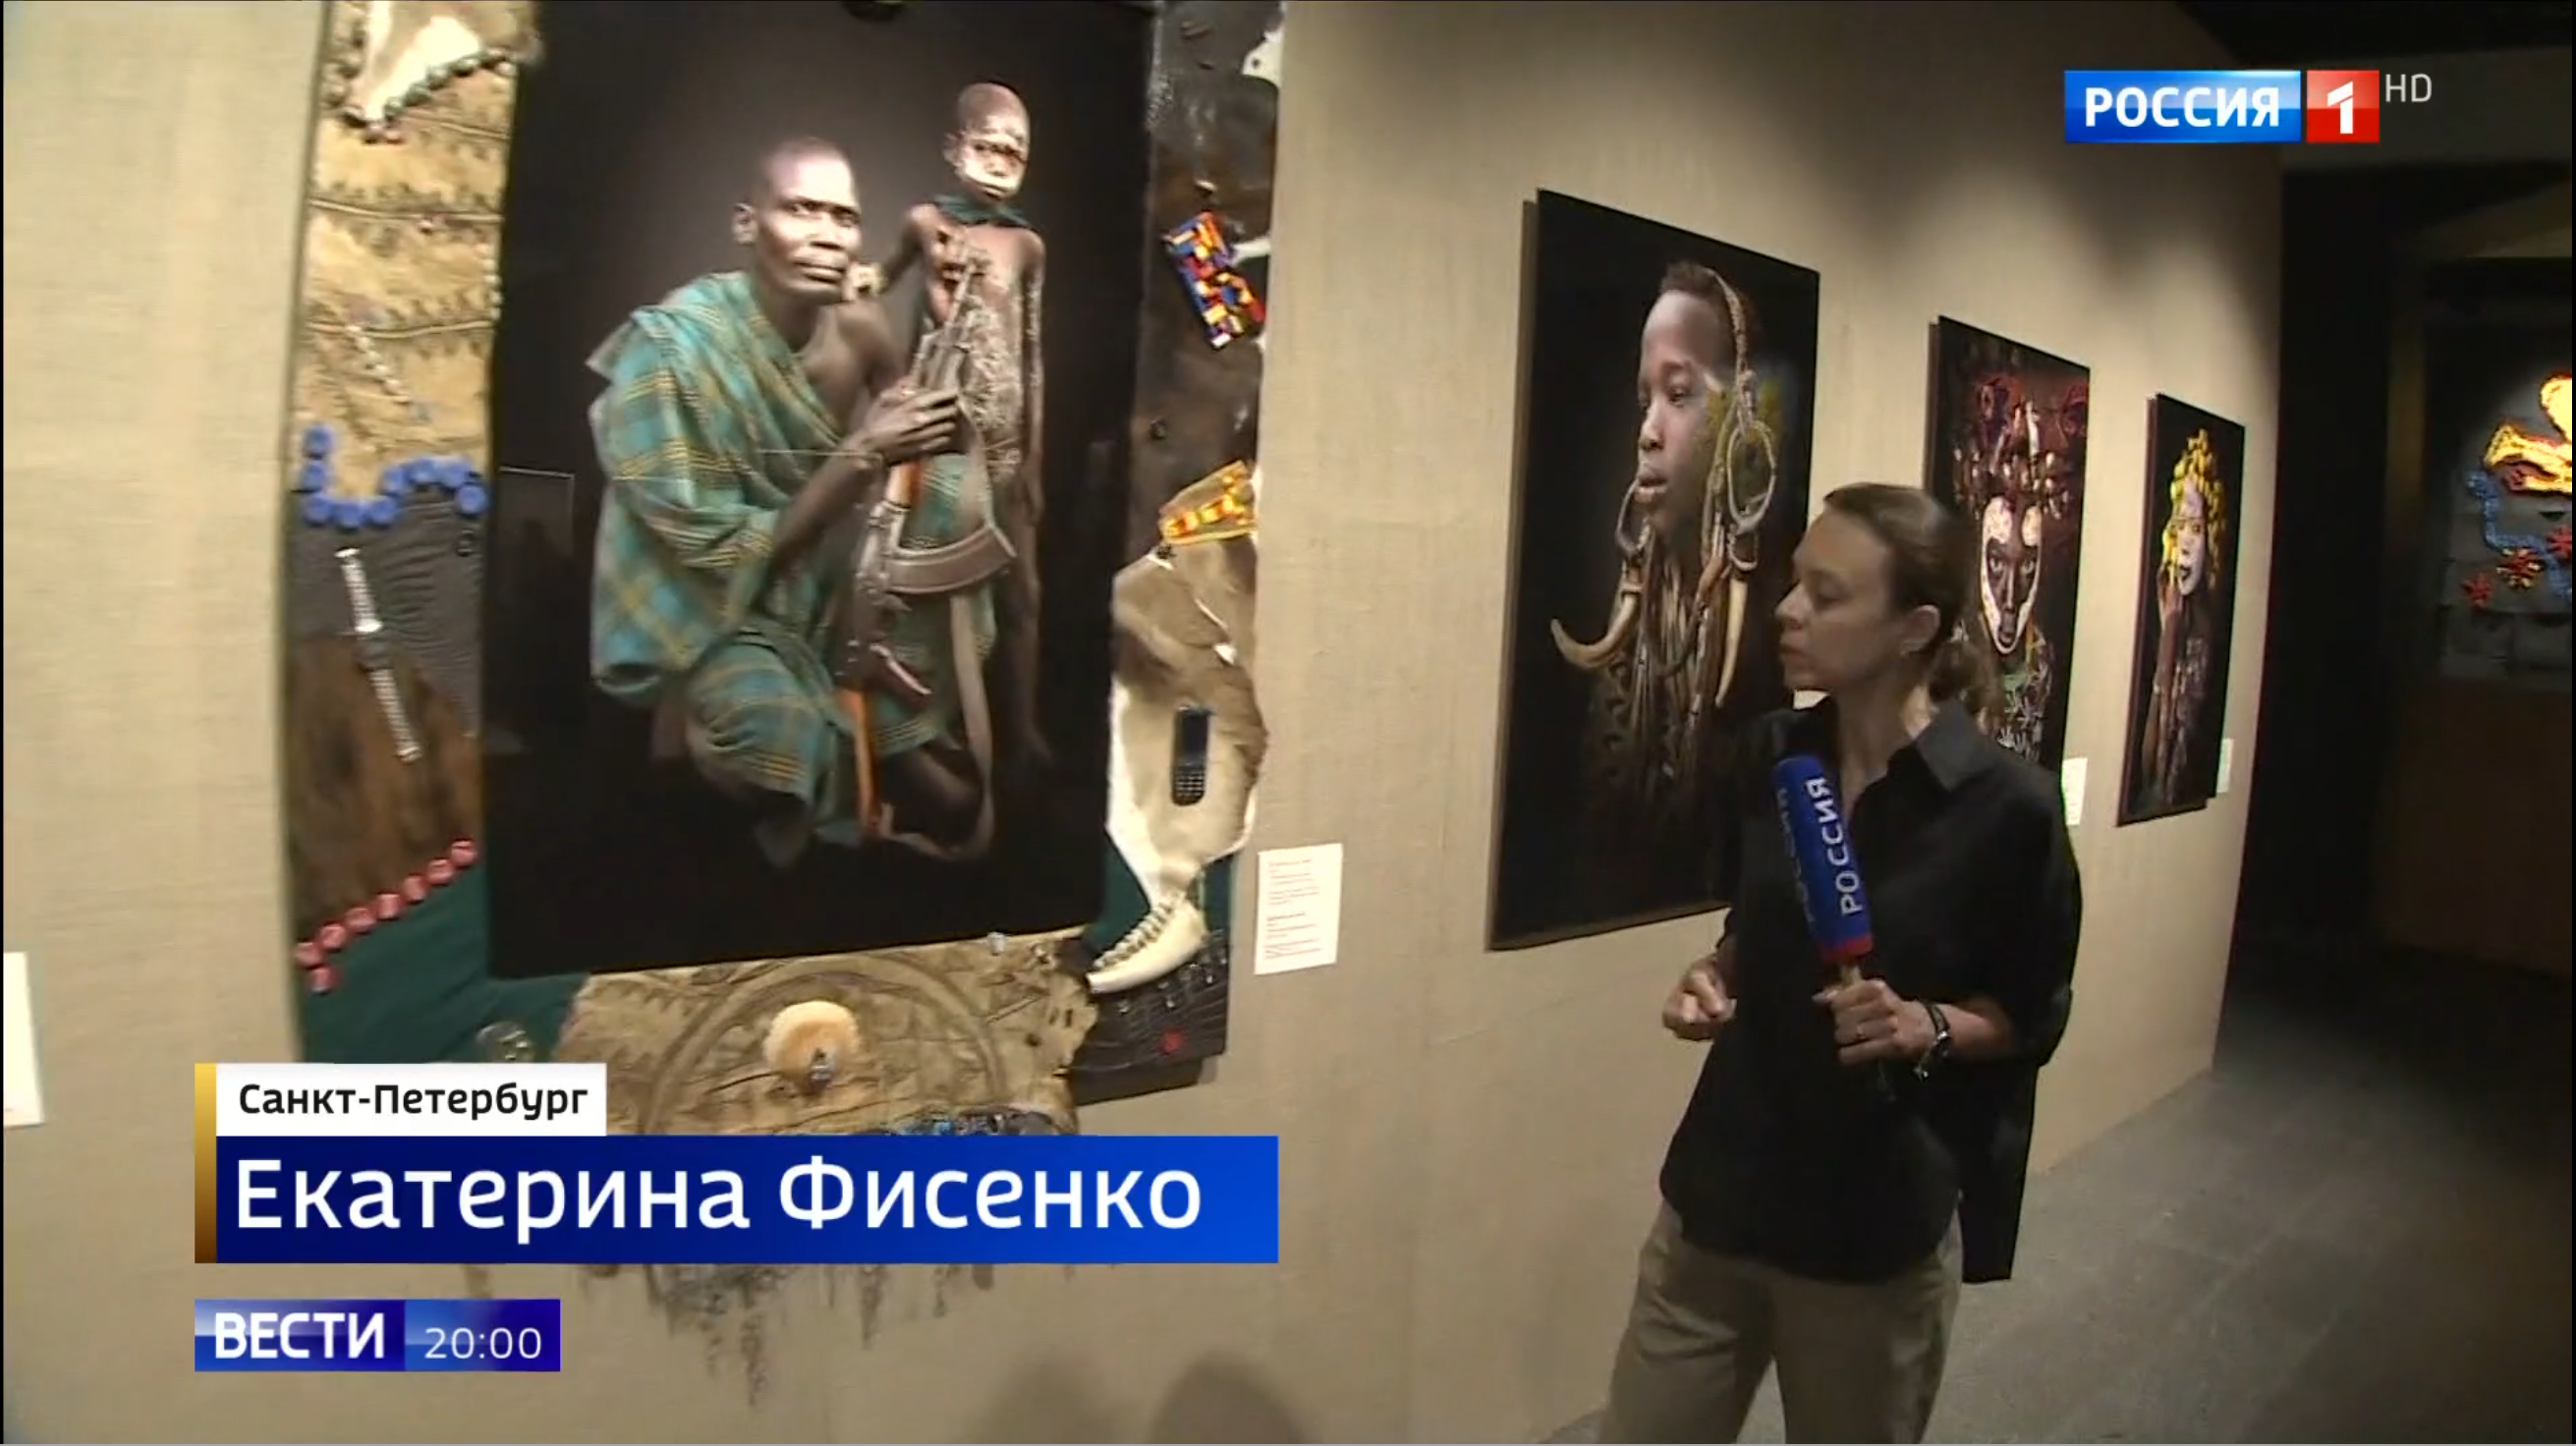 The first large-scale exhibition of contemporary African art opened in St. Petersburg